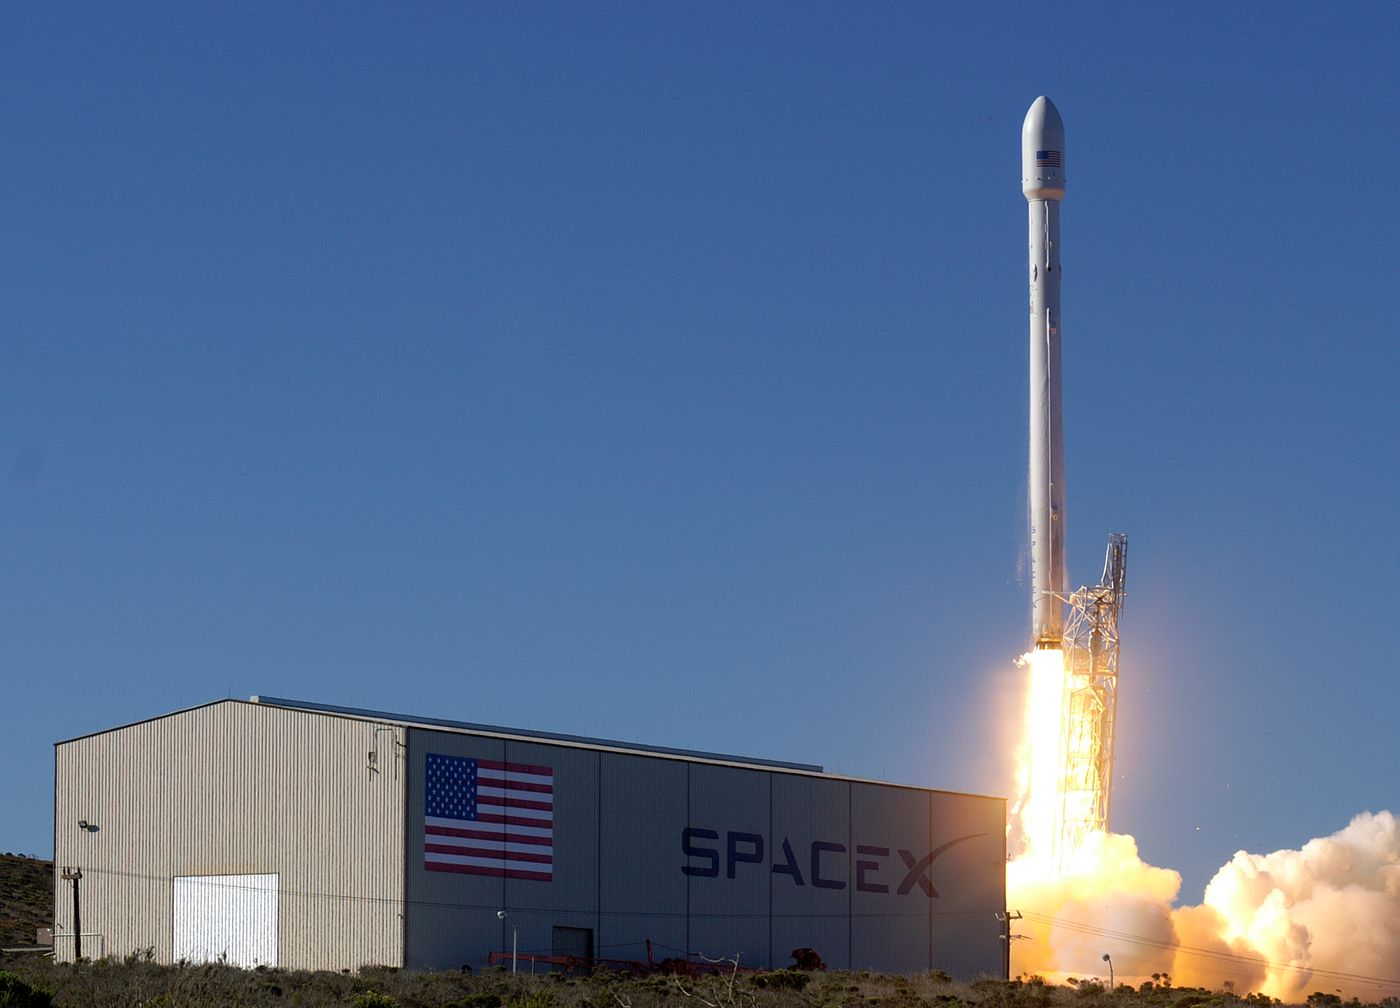 SpaceX will launch a reusable Falcon 9 rocket this week carrying the SES-9 satellite.